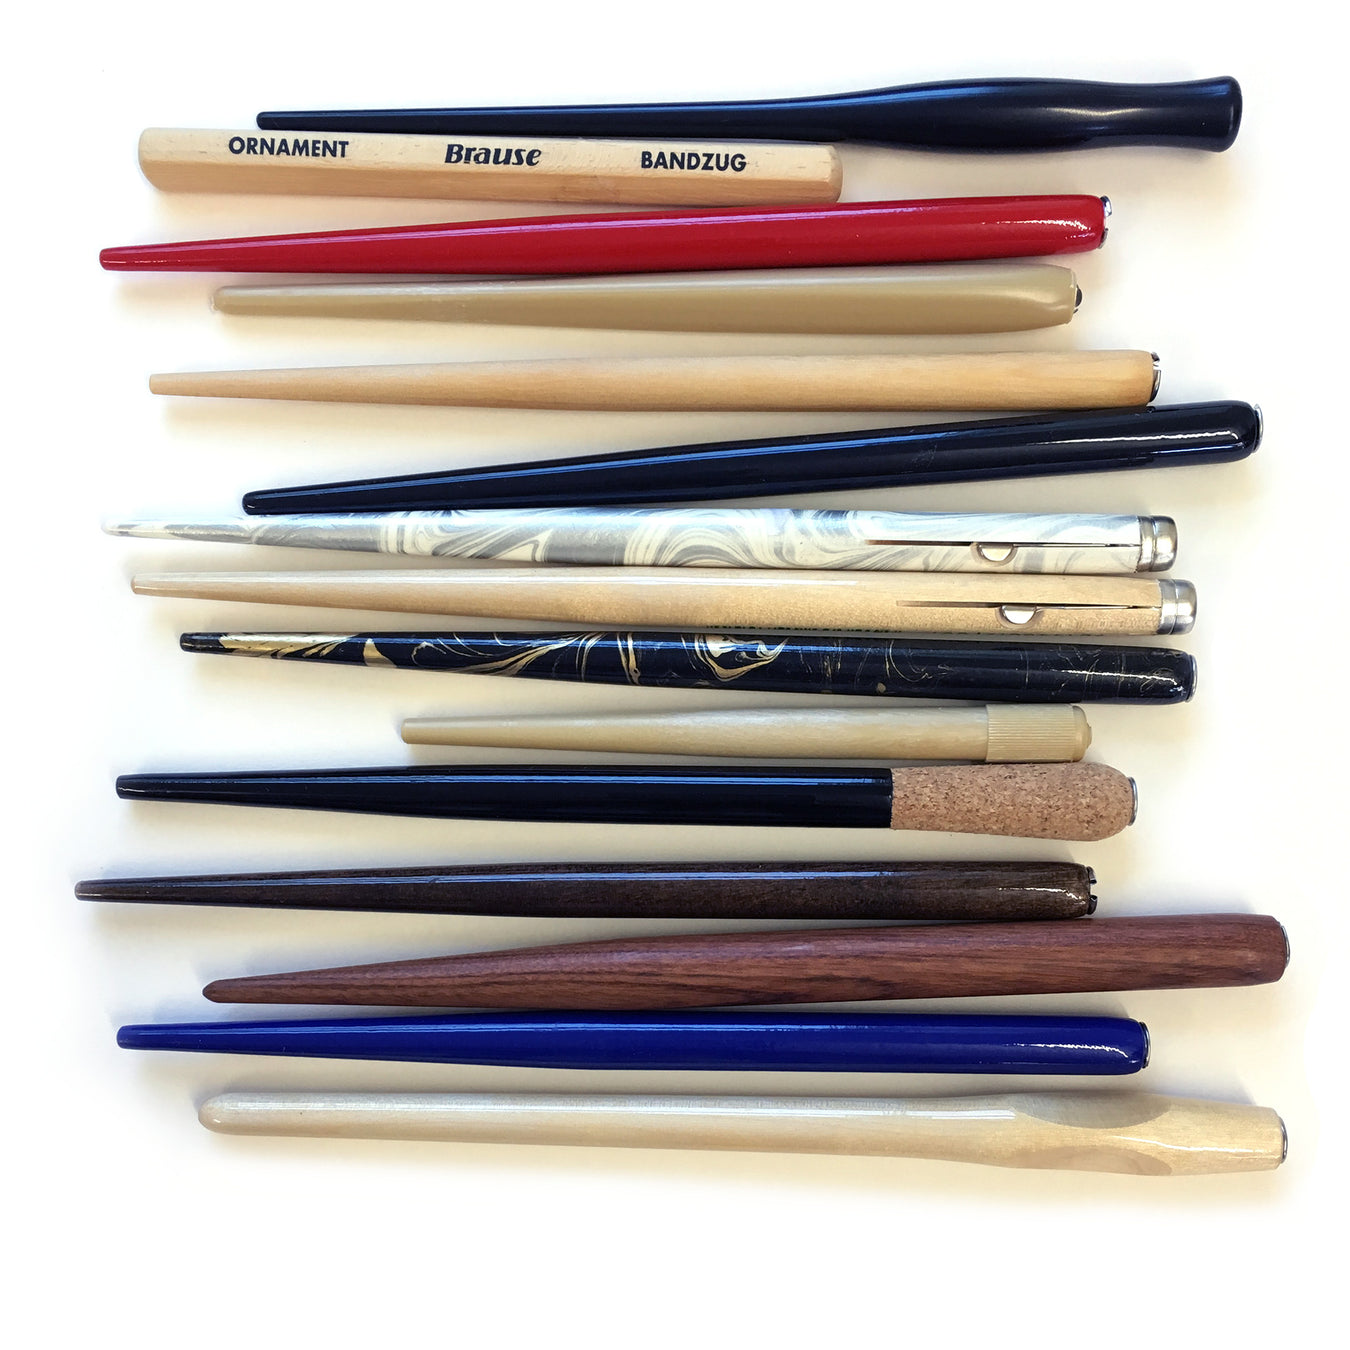 A Selection of Calligraphy Pen Holders from Scribblers Calligraphy